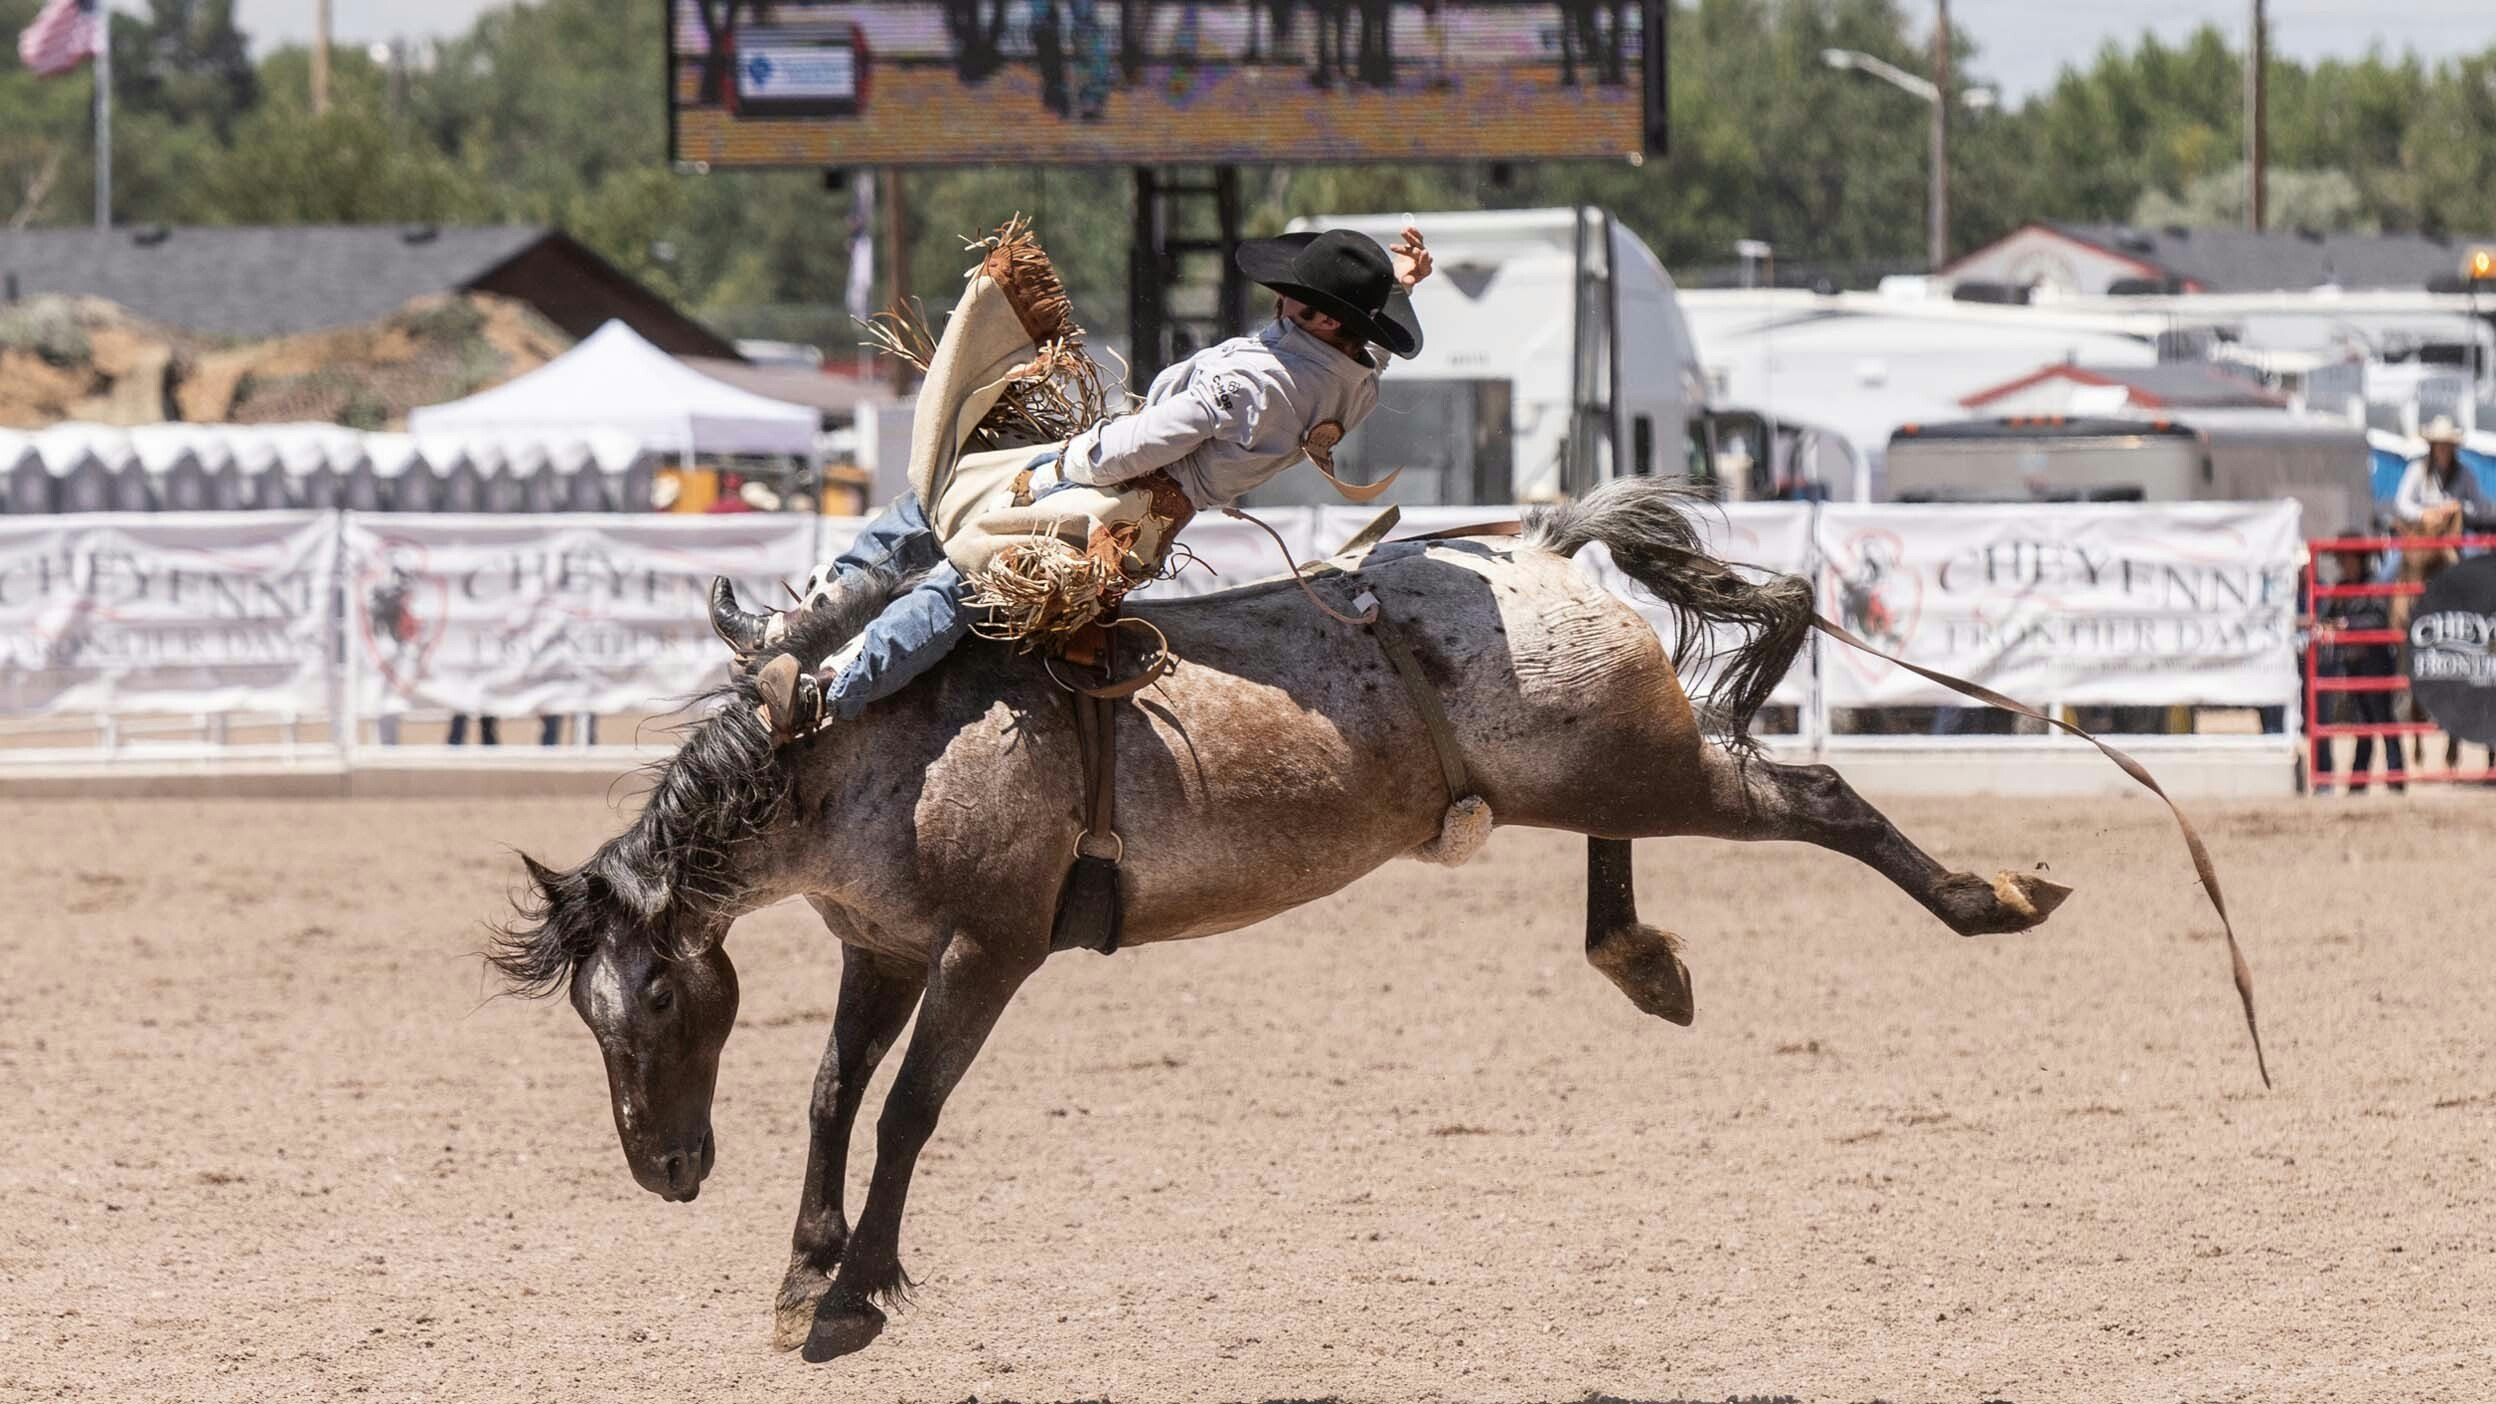 Donny Proffit from Diamondville, WY rides his bronc for a score of 84.50 in the Bareback Riding at Cheyenne Frontier Days on July 30, 2023.